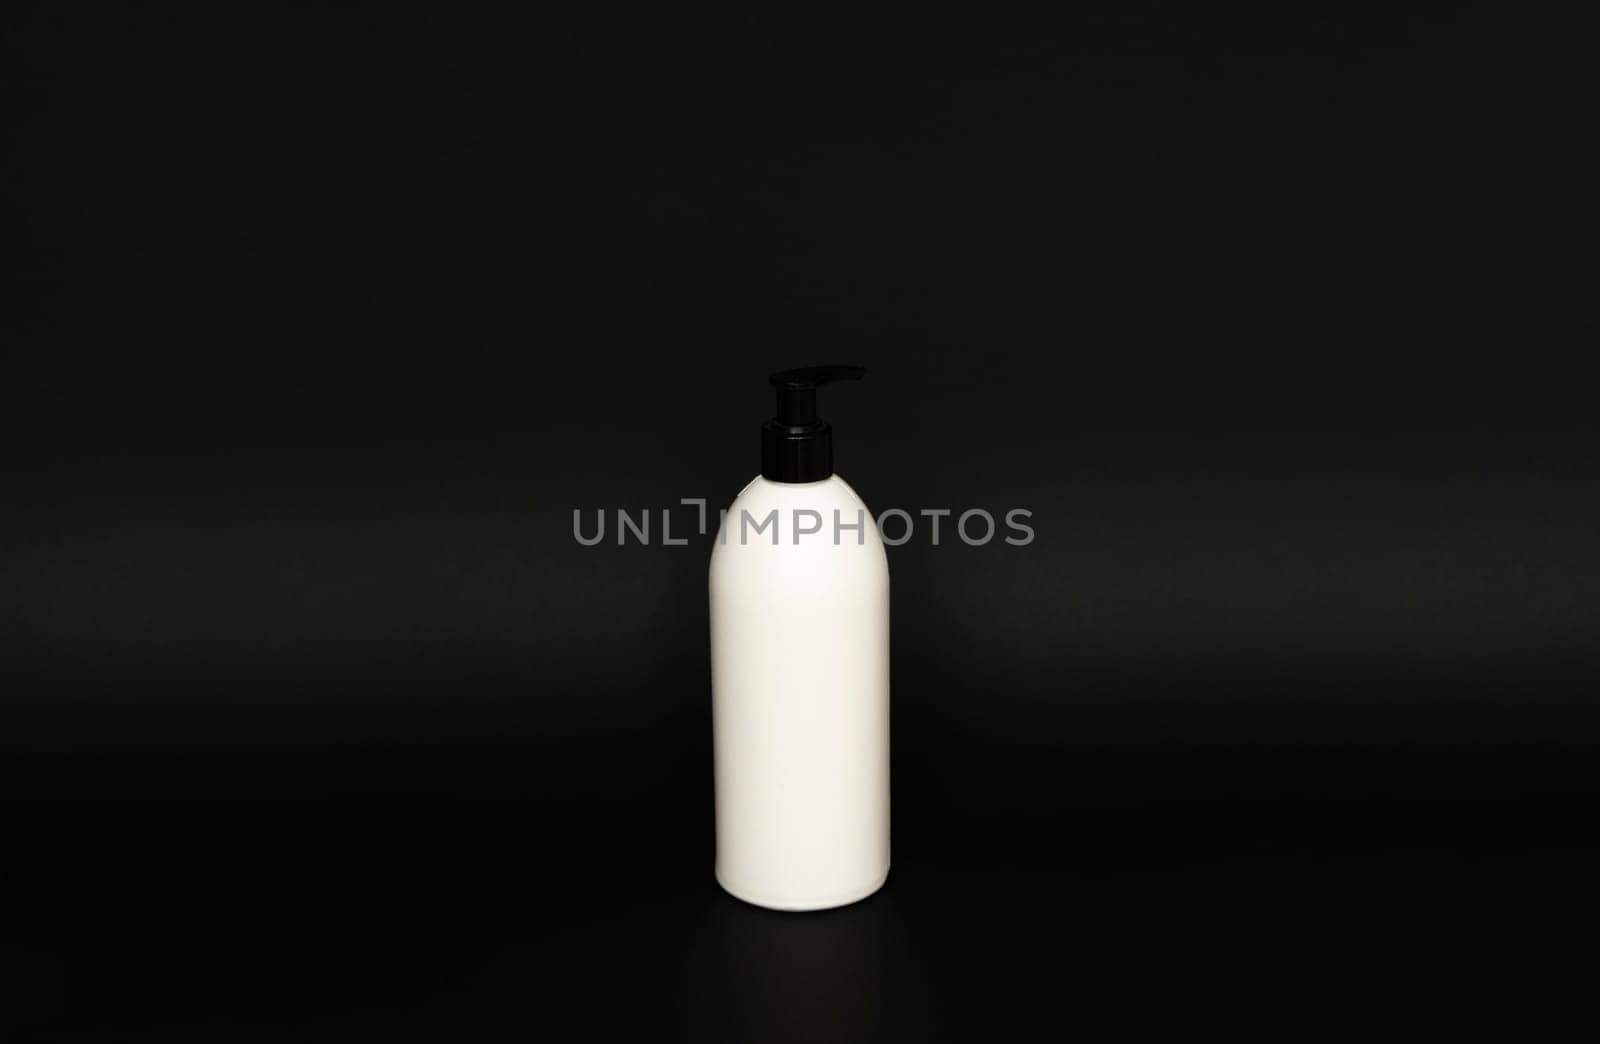 White unbranded bottle with a black dispenser isolated on black background. cosmetic packaging mockup with copy space. Bottle for a shower, gel, soap